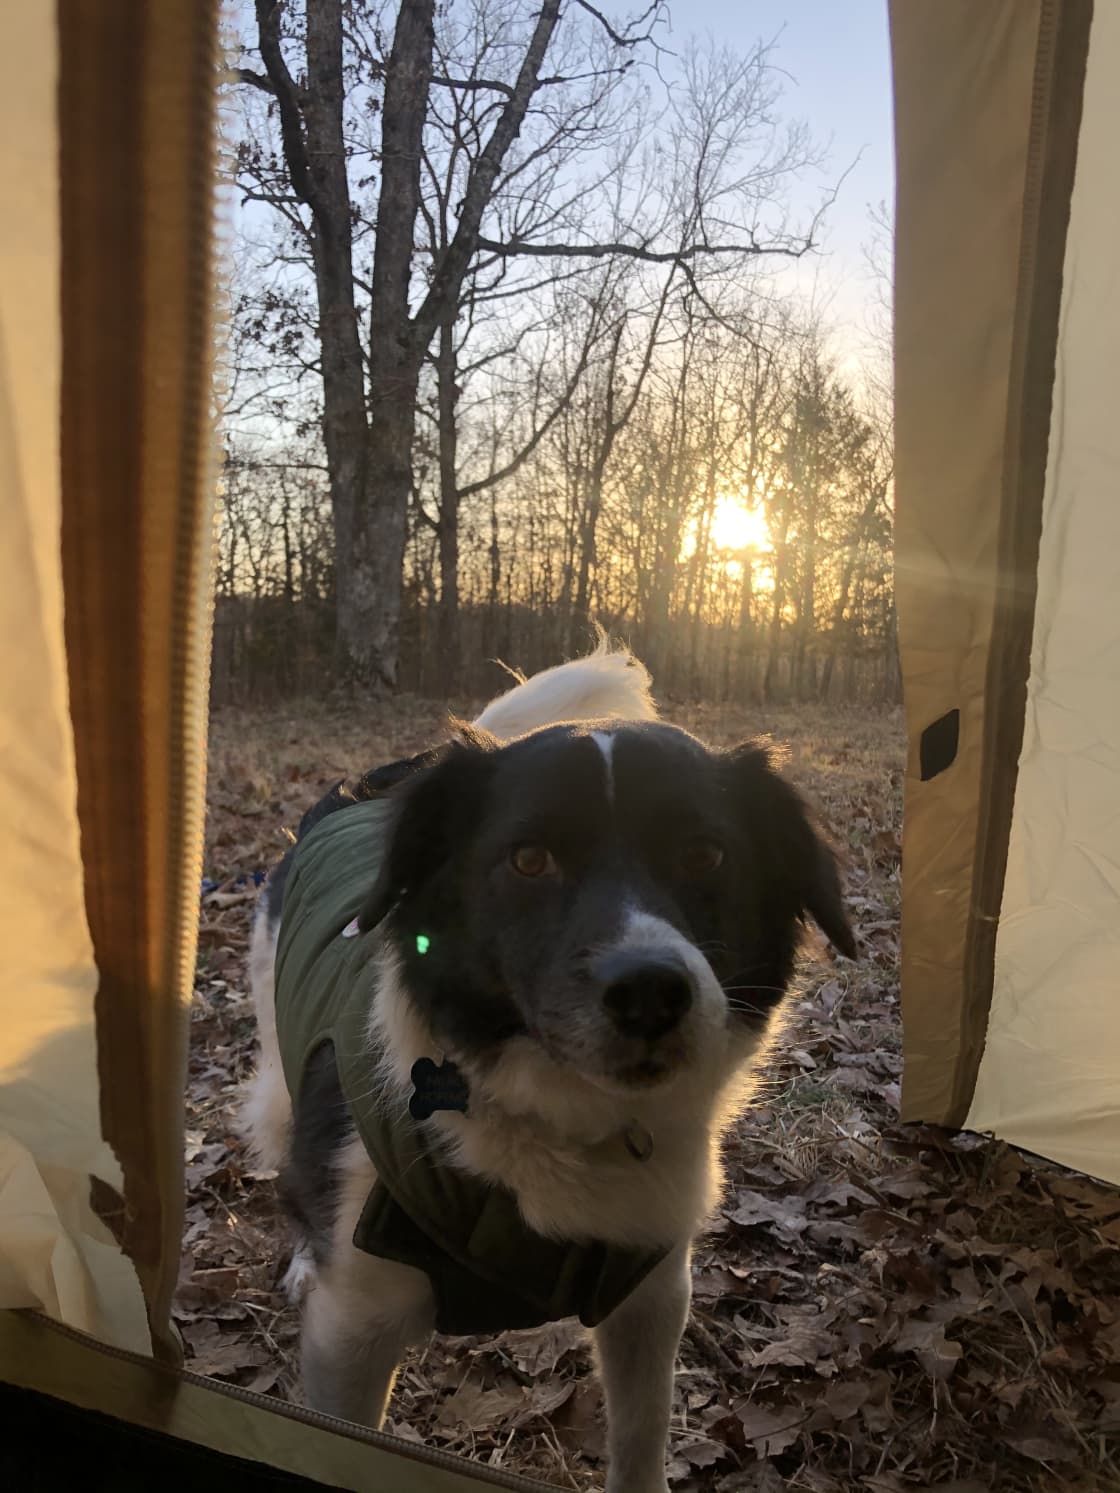 Sunrise and pup is ready to roll